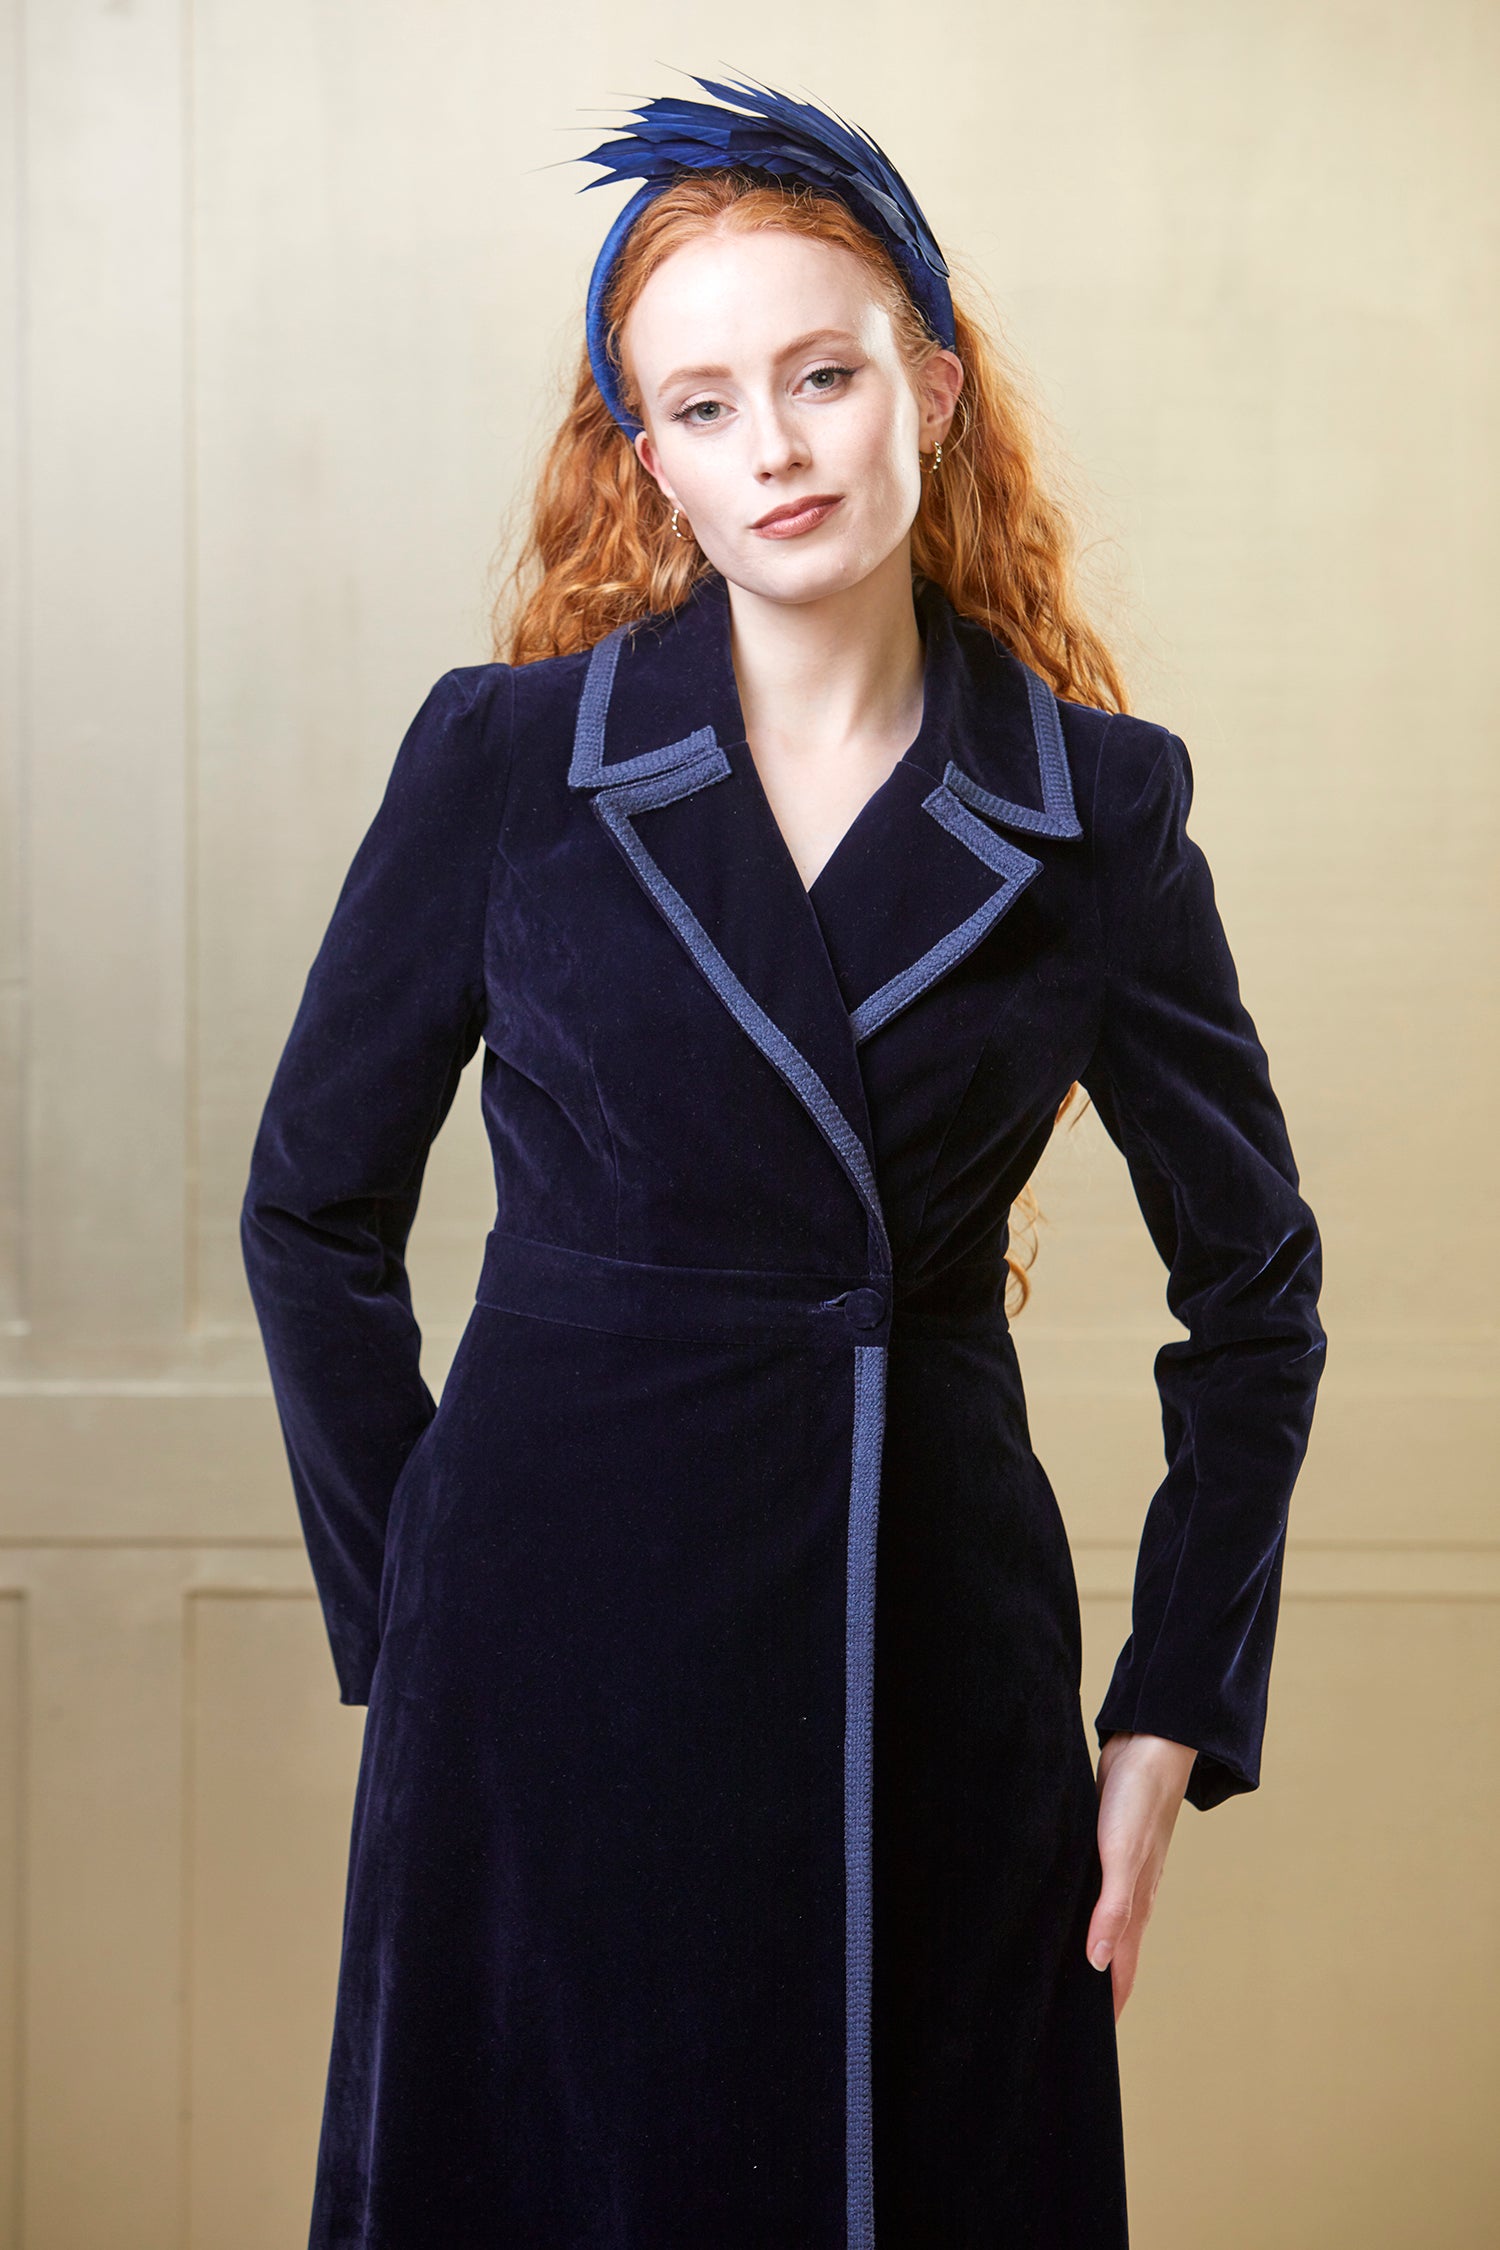 A navy blue velvet coat dress with braid trims. The coat dress is accessorised for a wedding look with a matching headband.